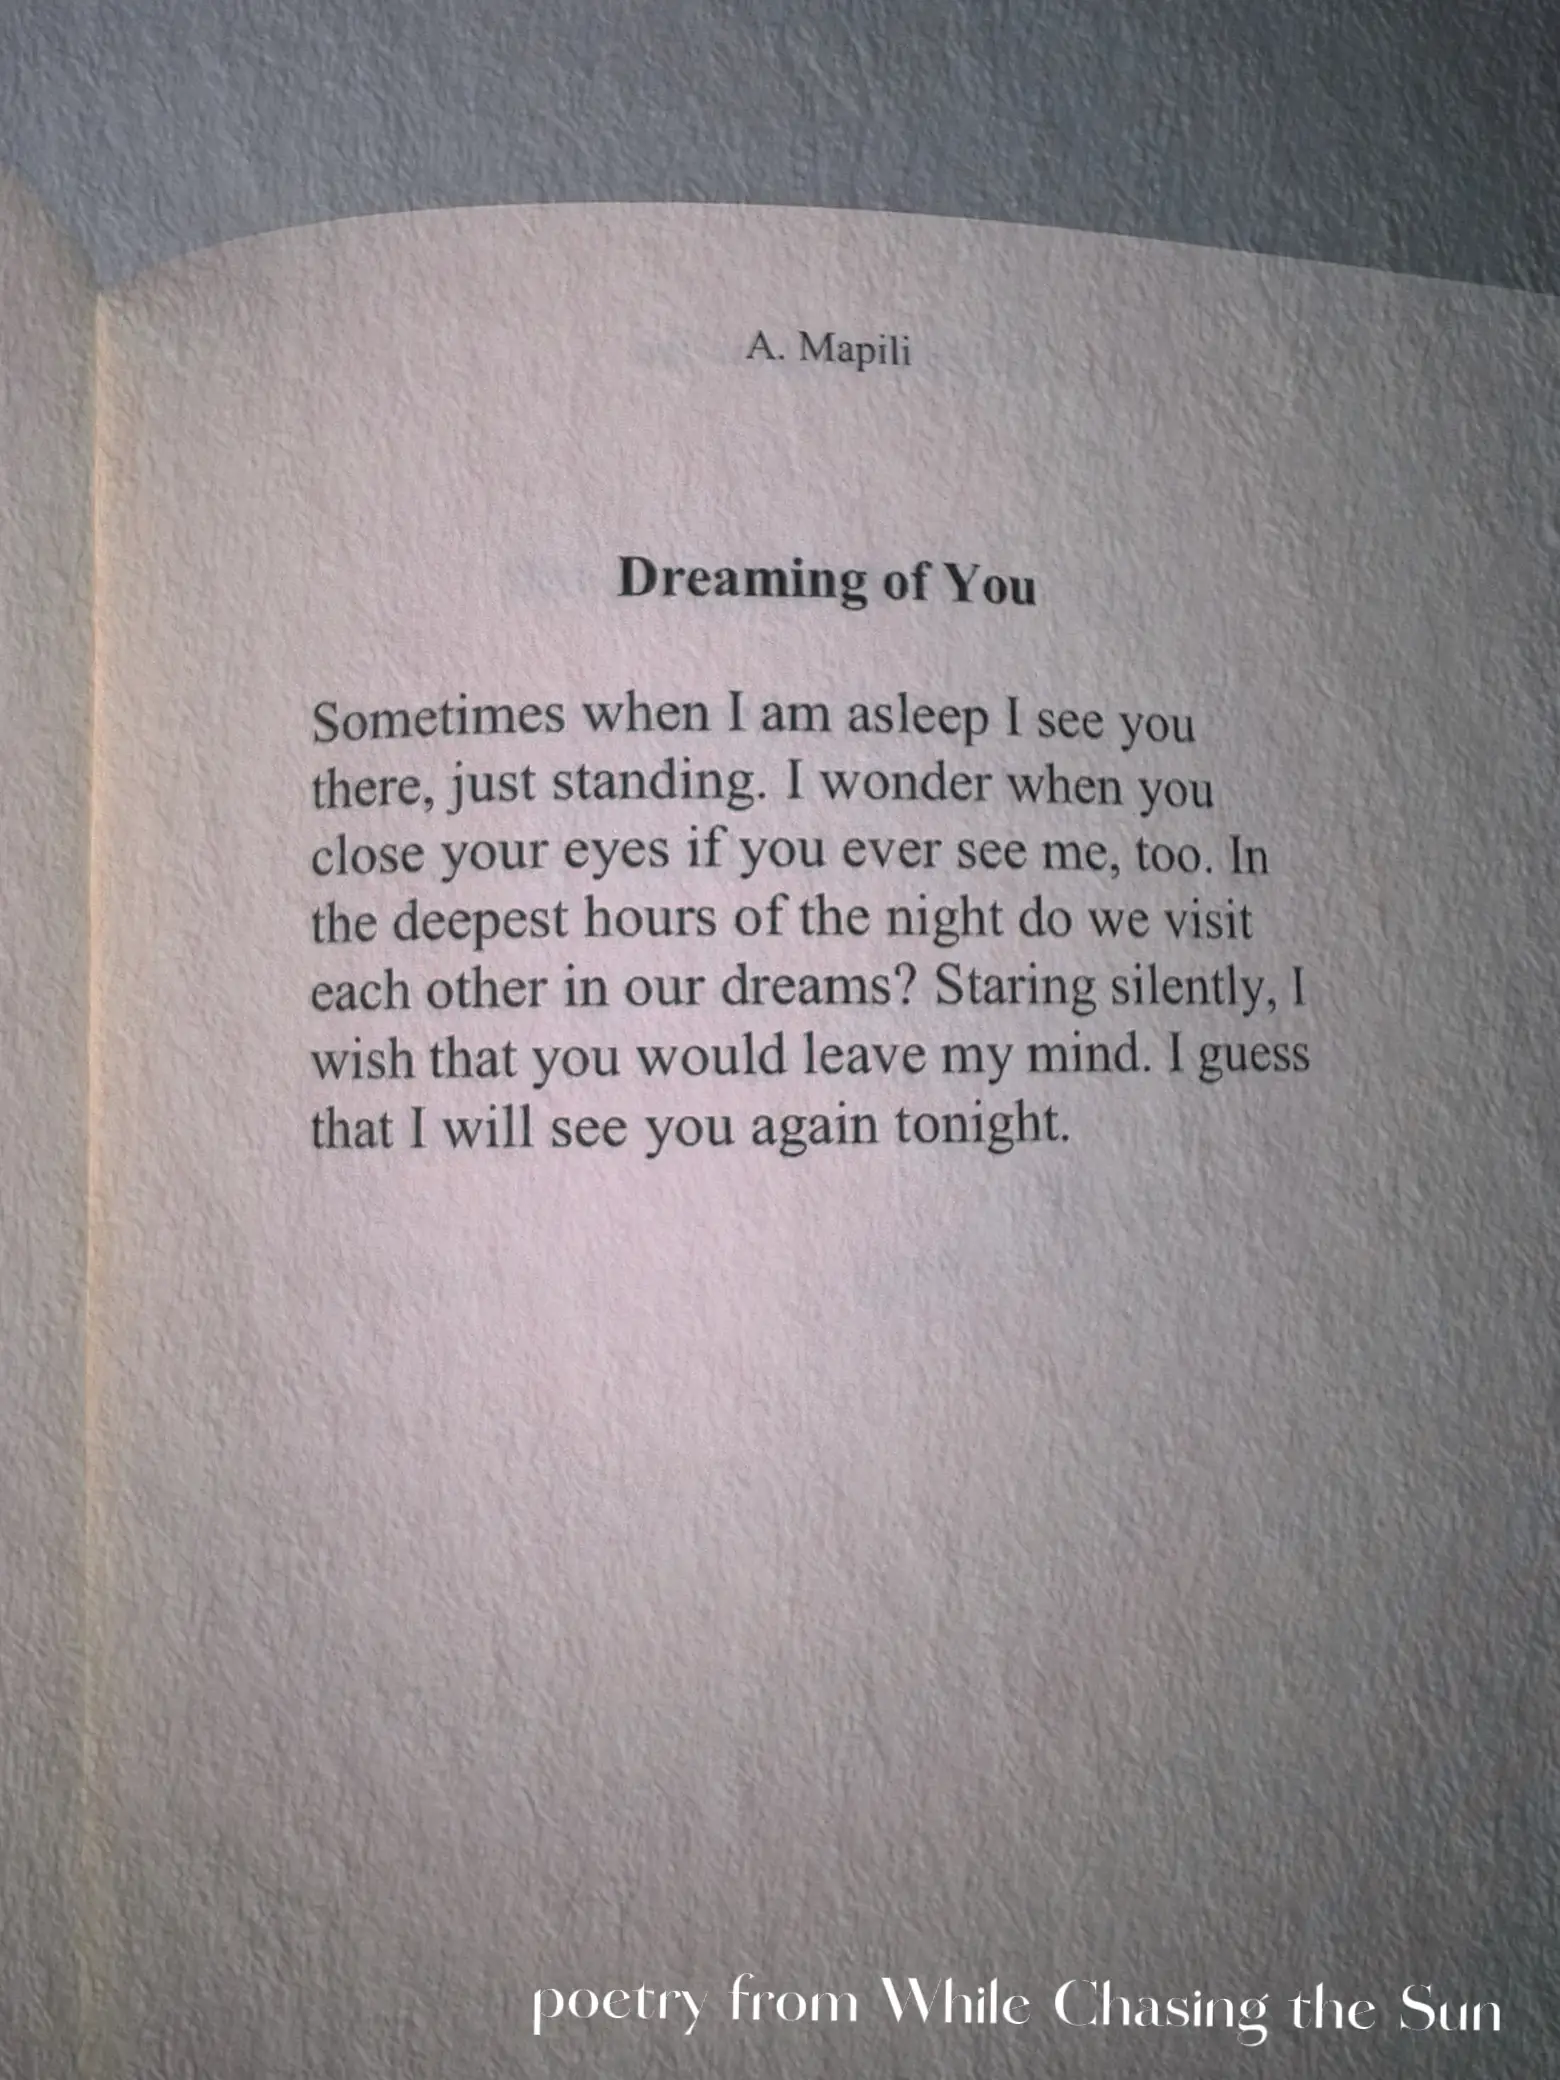 poetry from While Chasing the Sun 's images